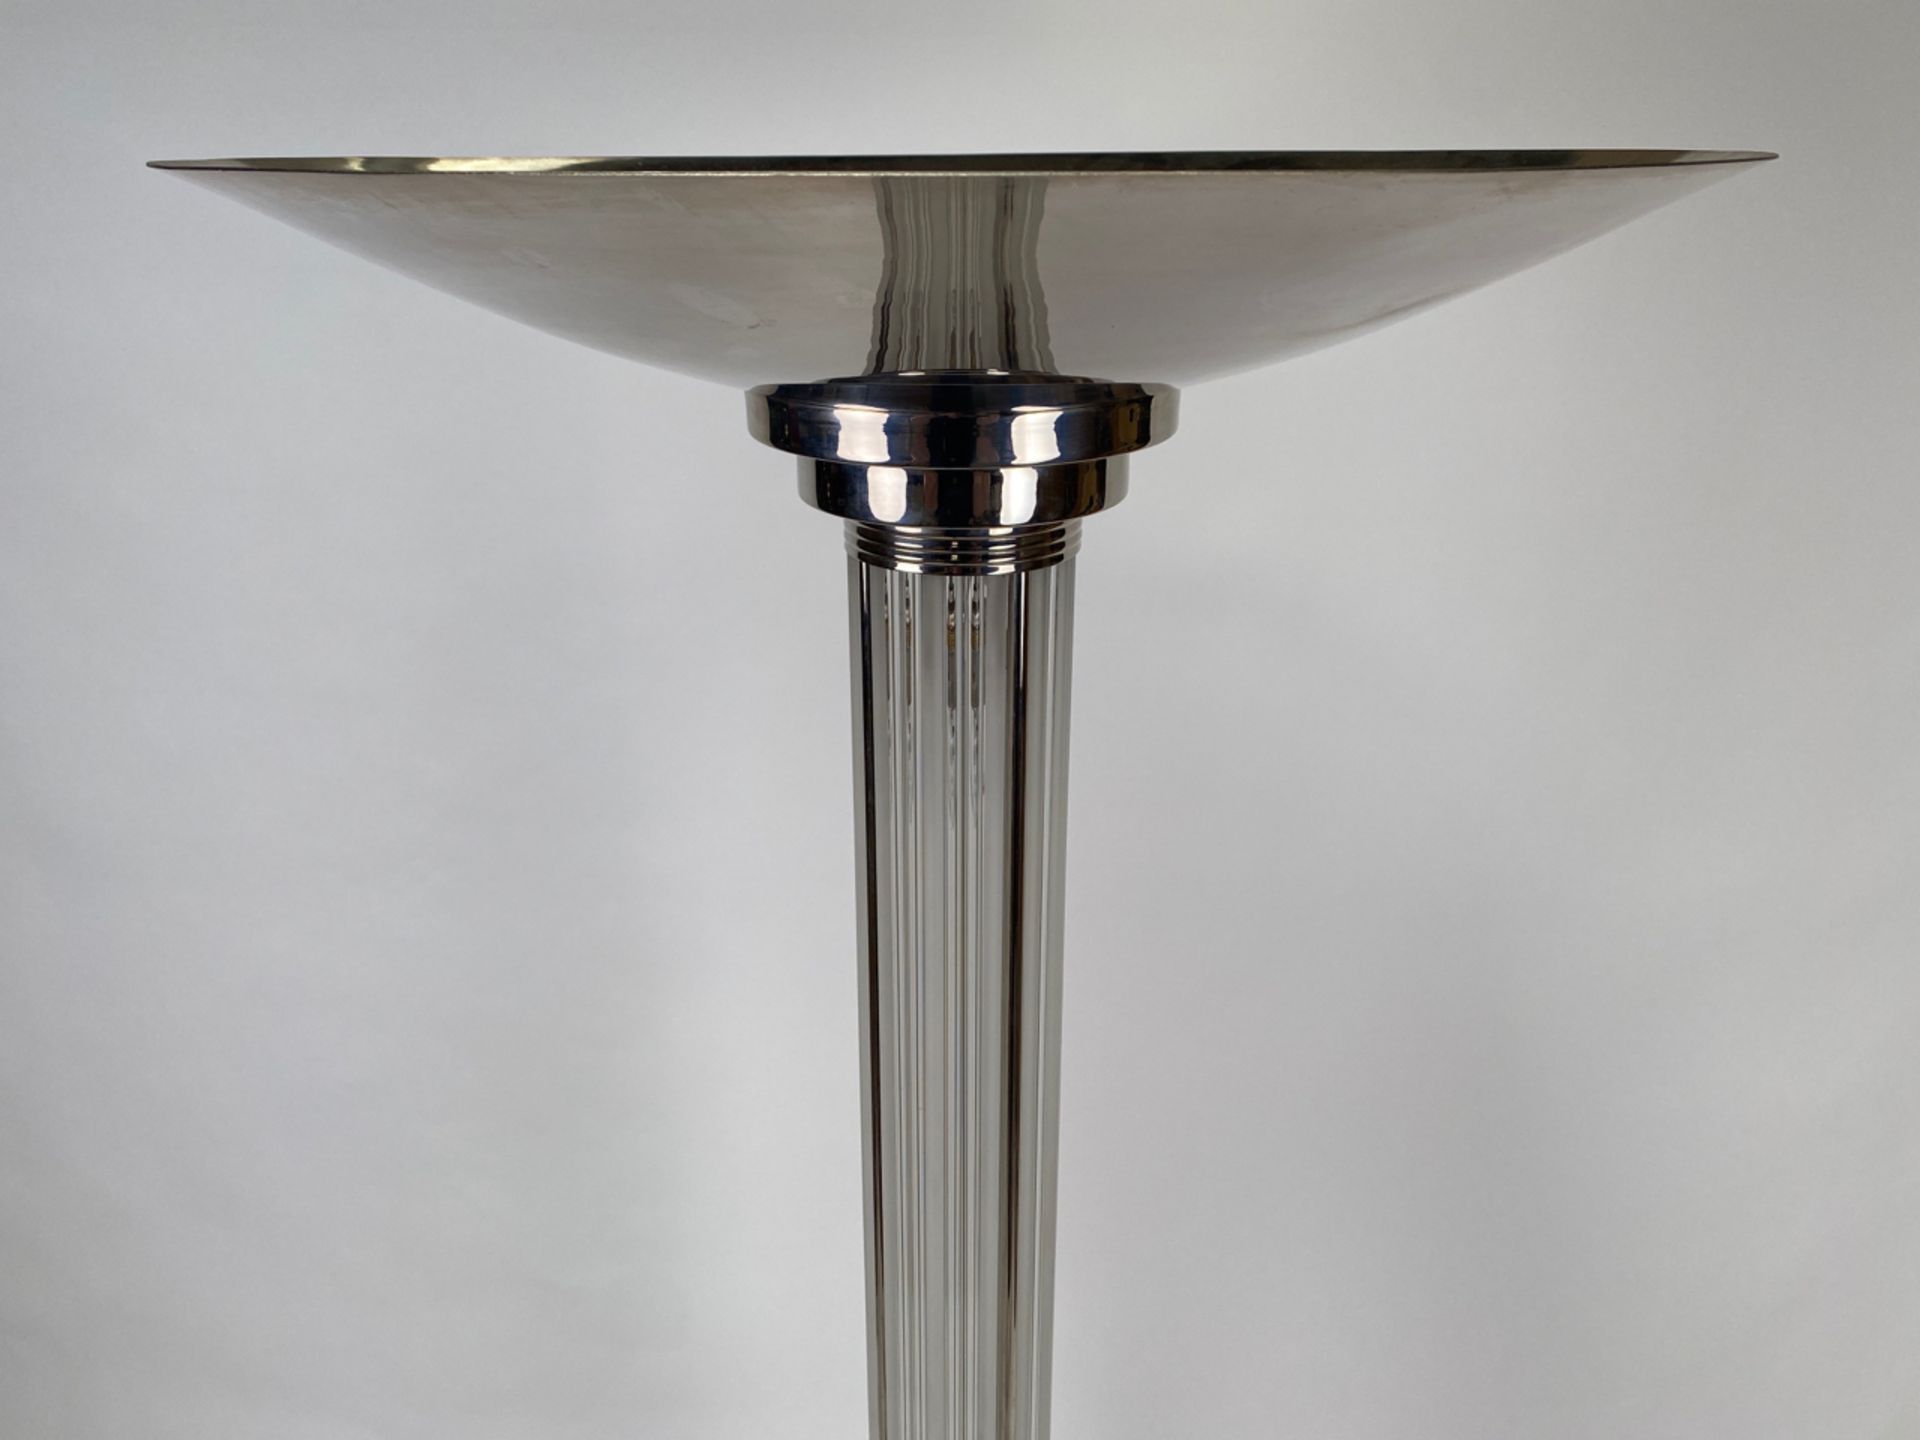 Art Deco Style Model le Mons Glass Rods, Chrome, and Black Lacquer Floor Lamp - Image 6 of 7